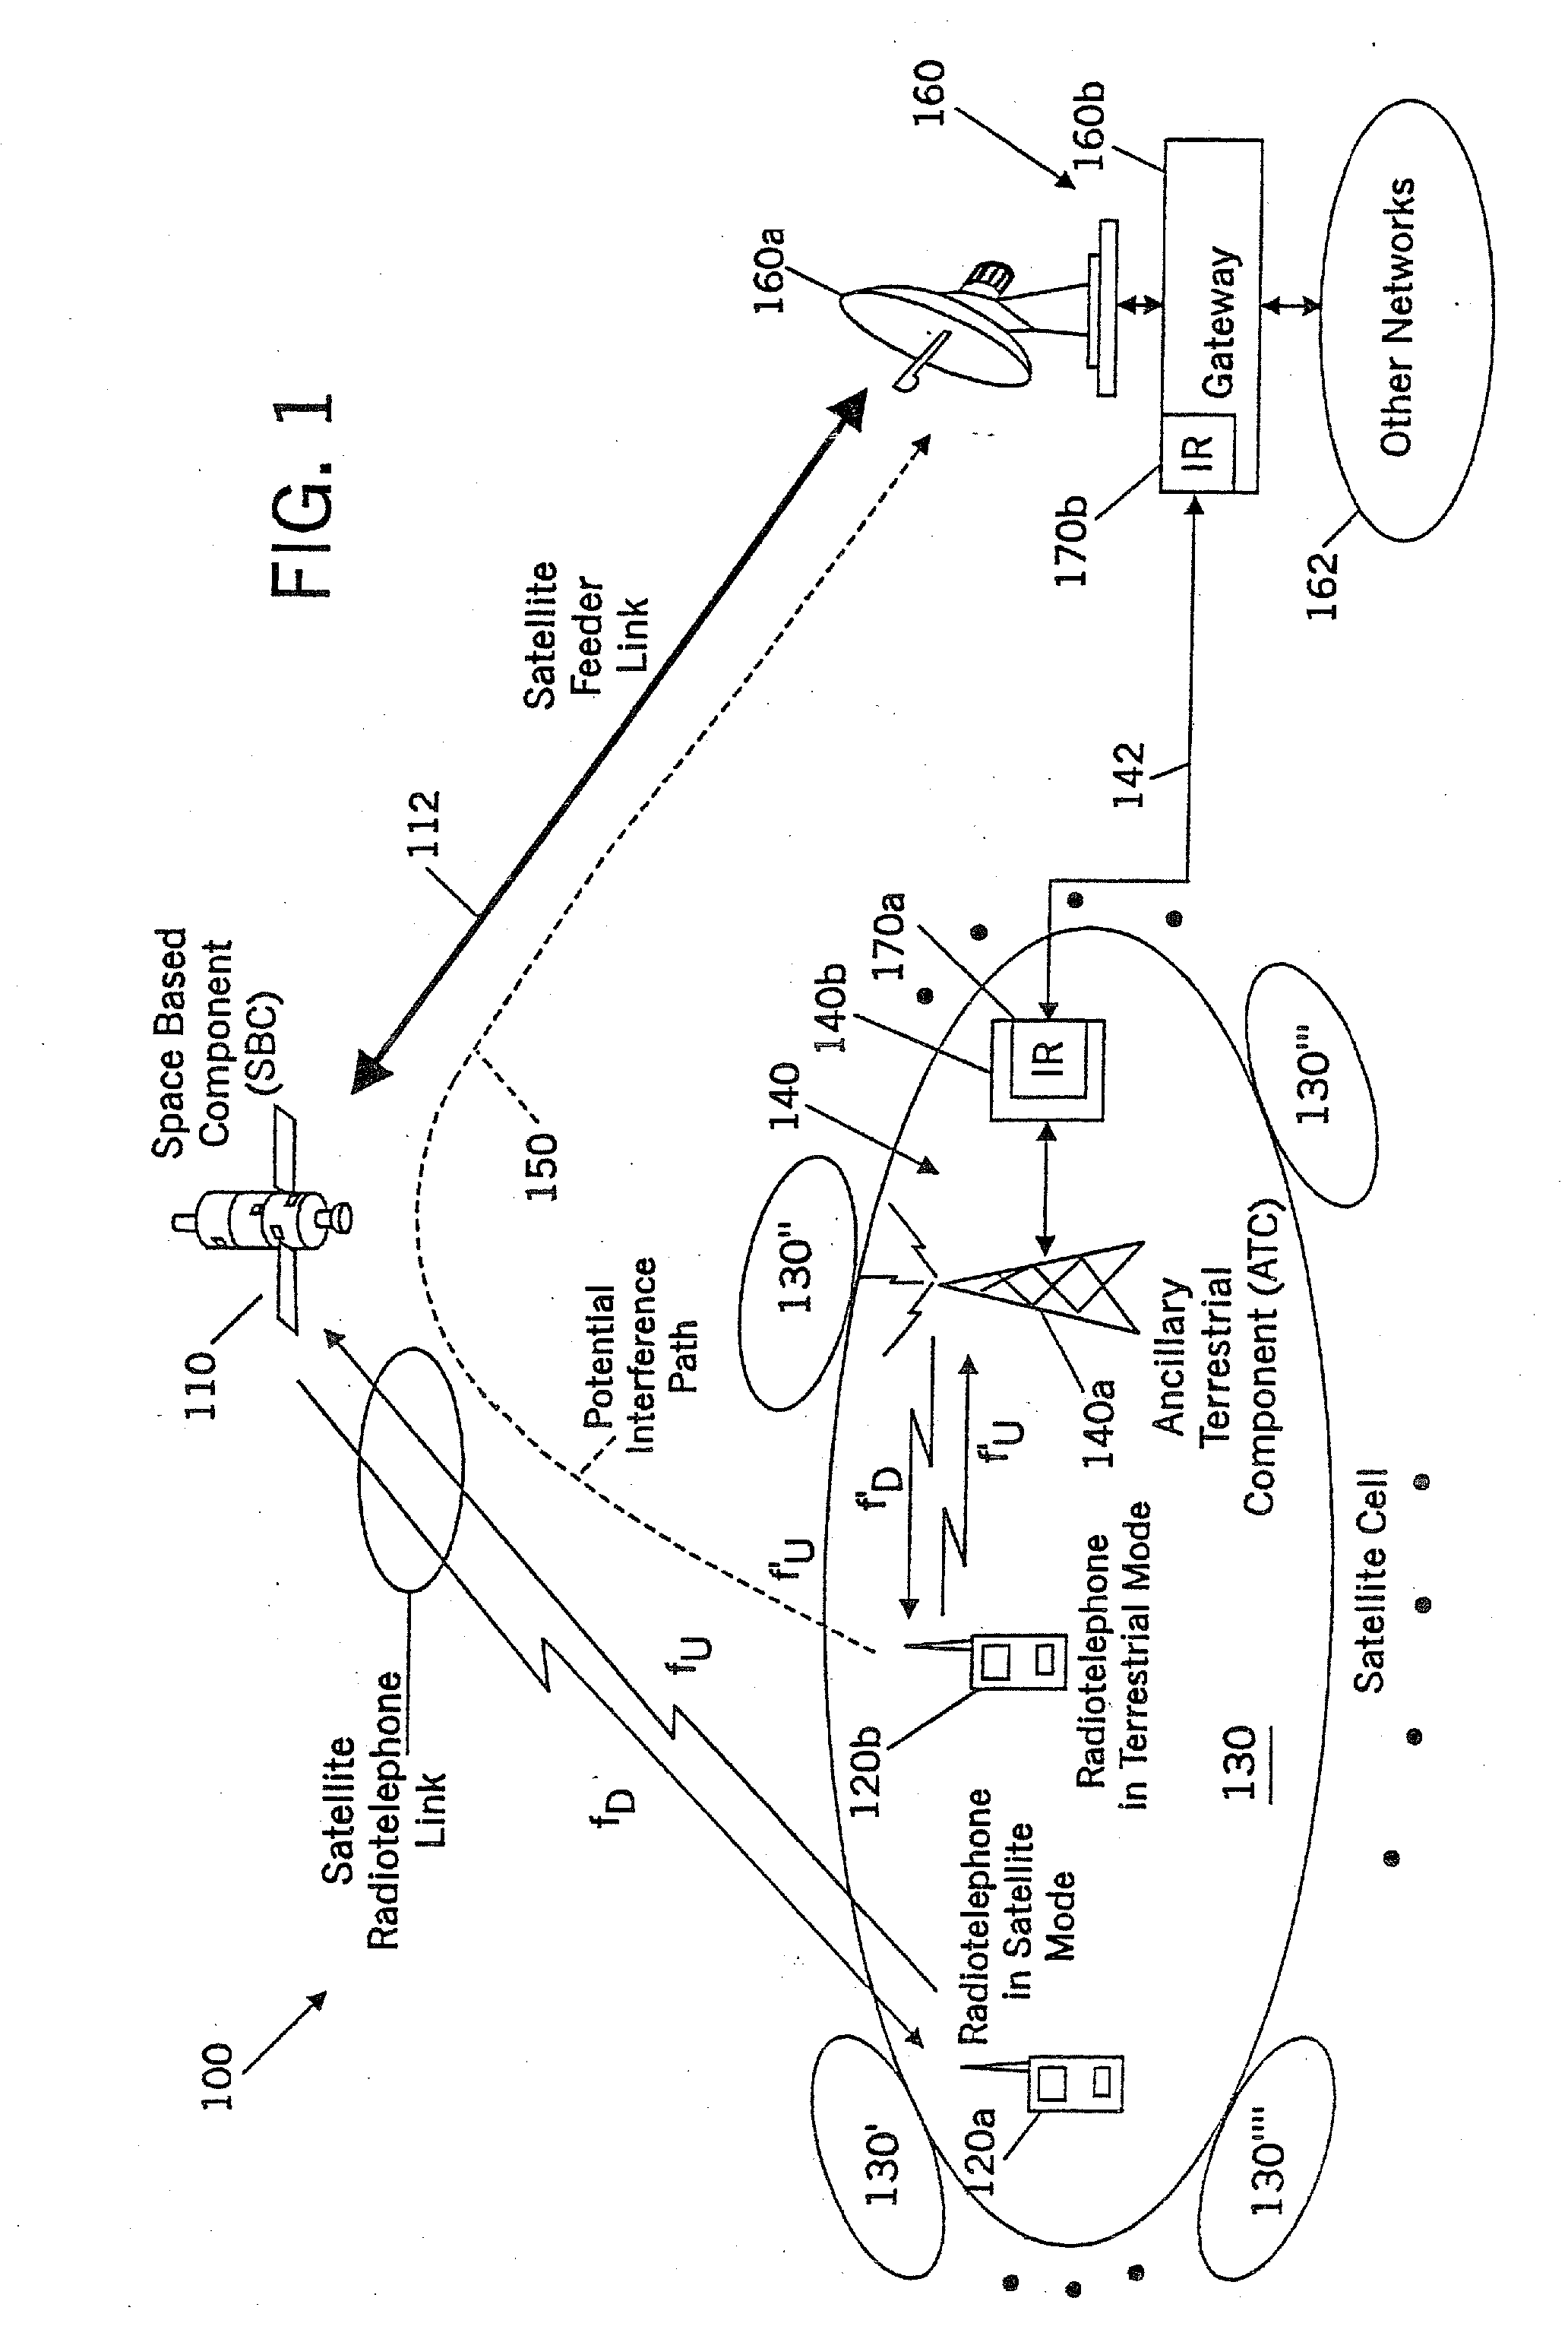 Network-Assisted Global Positioning Systems, Methods and Terminals Including Doppler Shift and Code Phase Estimates